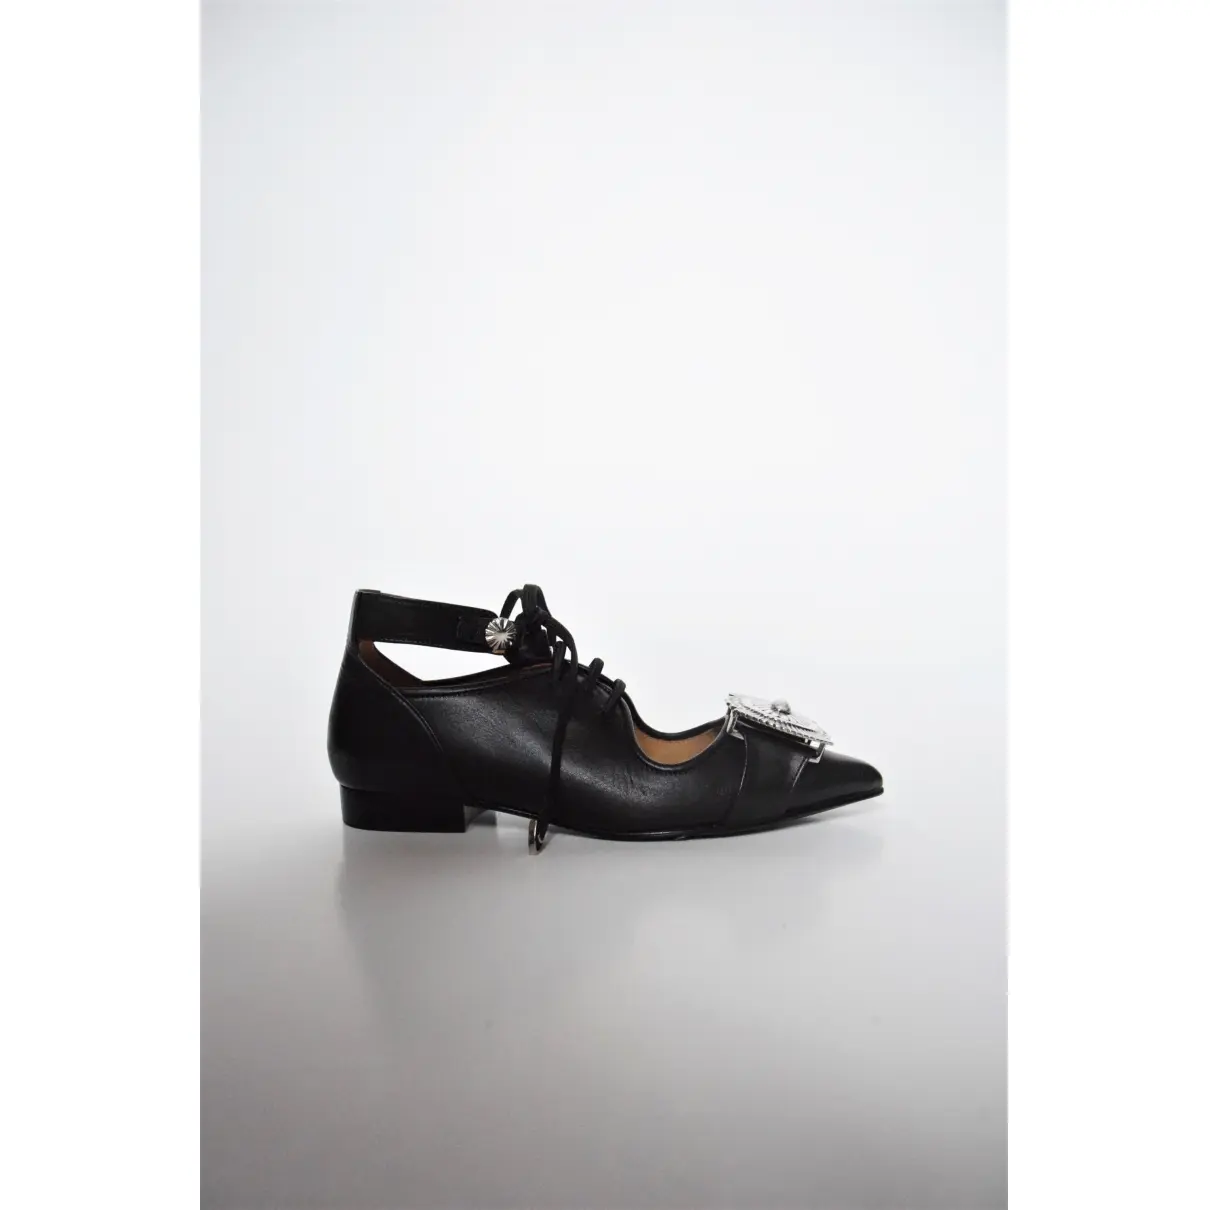 Toga Archives Leather ballet flats for sale